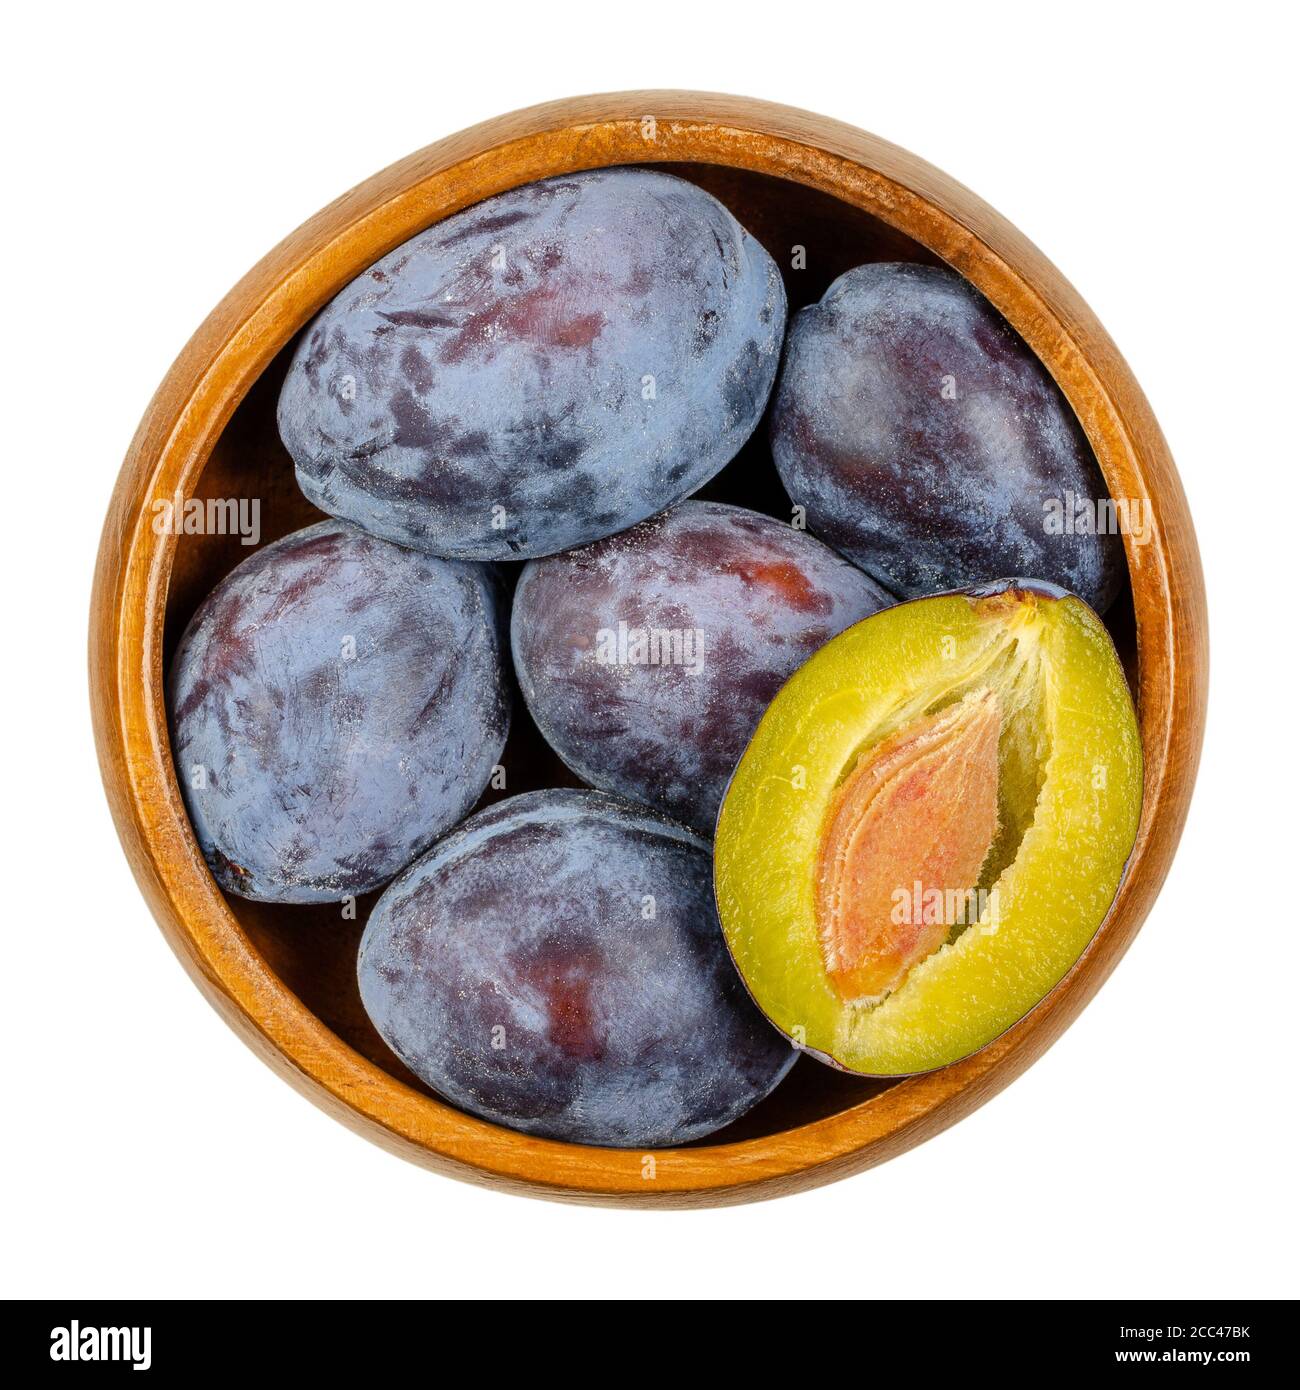 Ripe European plums with cross section of one fruit in a wooden bowl. Freestone fruit with purple, violet and black skin, also called Damson. Stock Photo